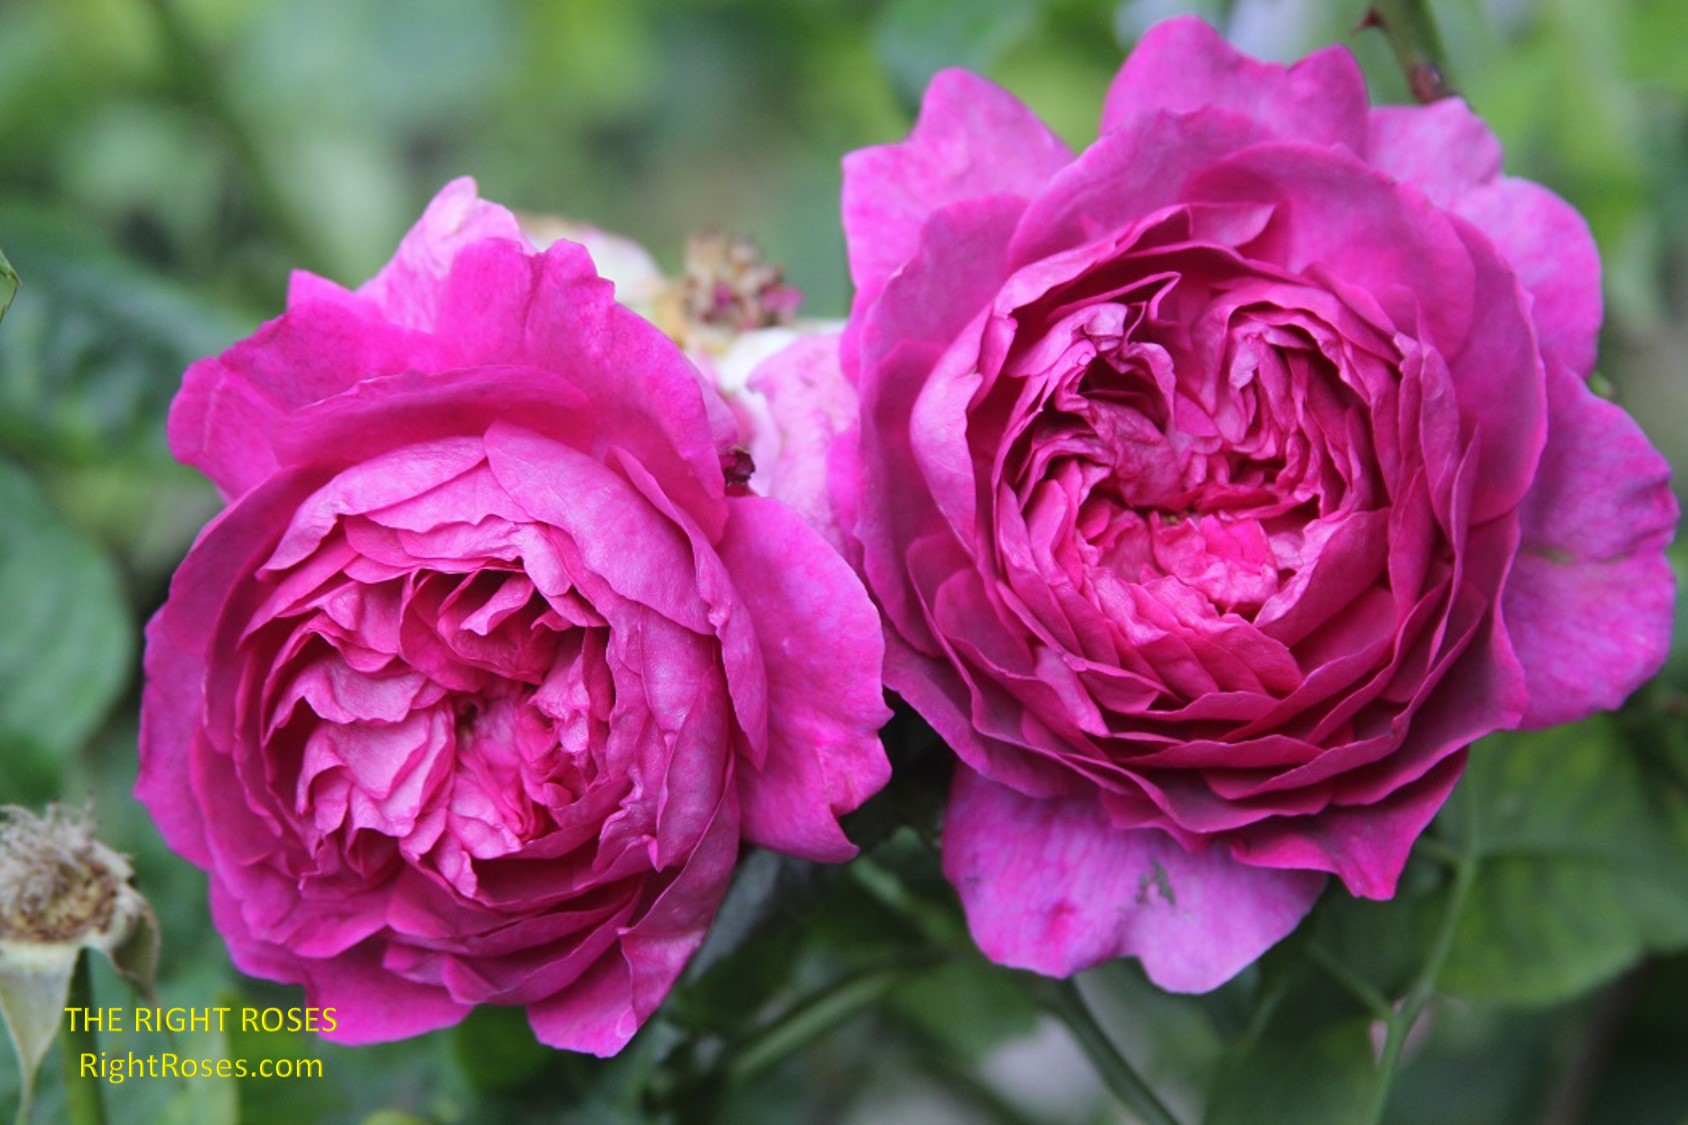 young lycidas rose review the right roses score best top garden store david austin english roses rose products rose rating the right leap rose food